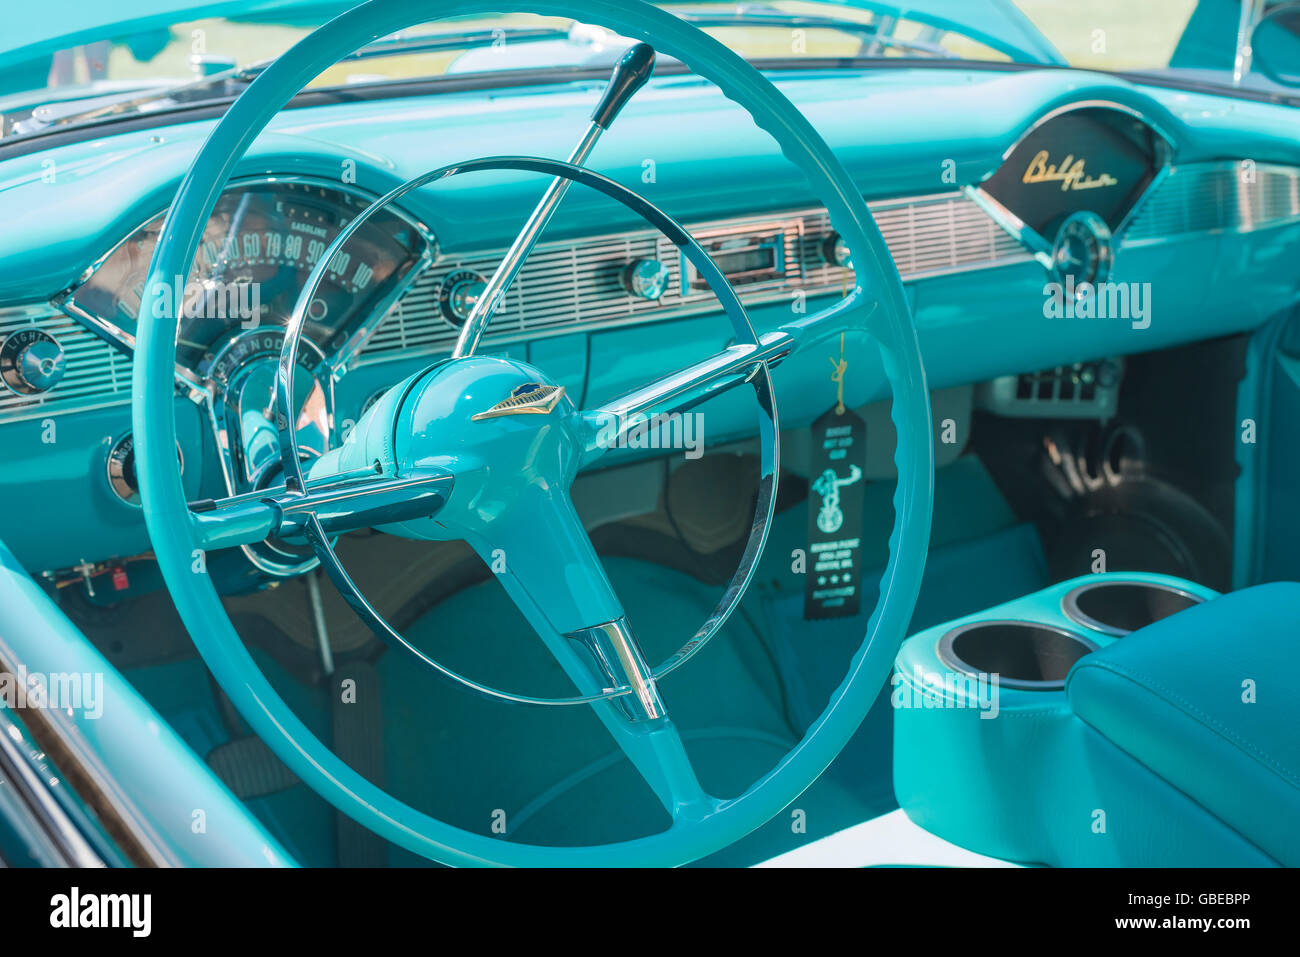 Steering wheel and instrument panel of a turquoise 1957 Chevrolet Bel Air car. Stock Photo